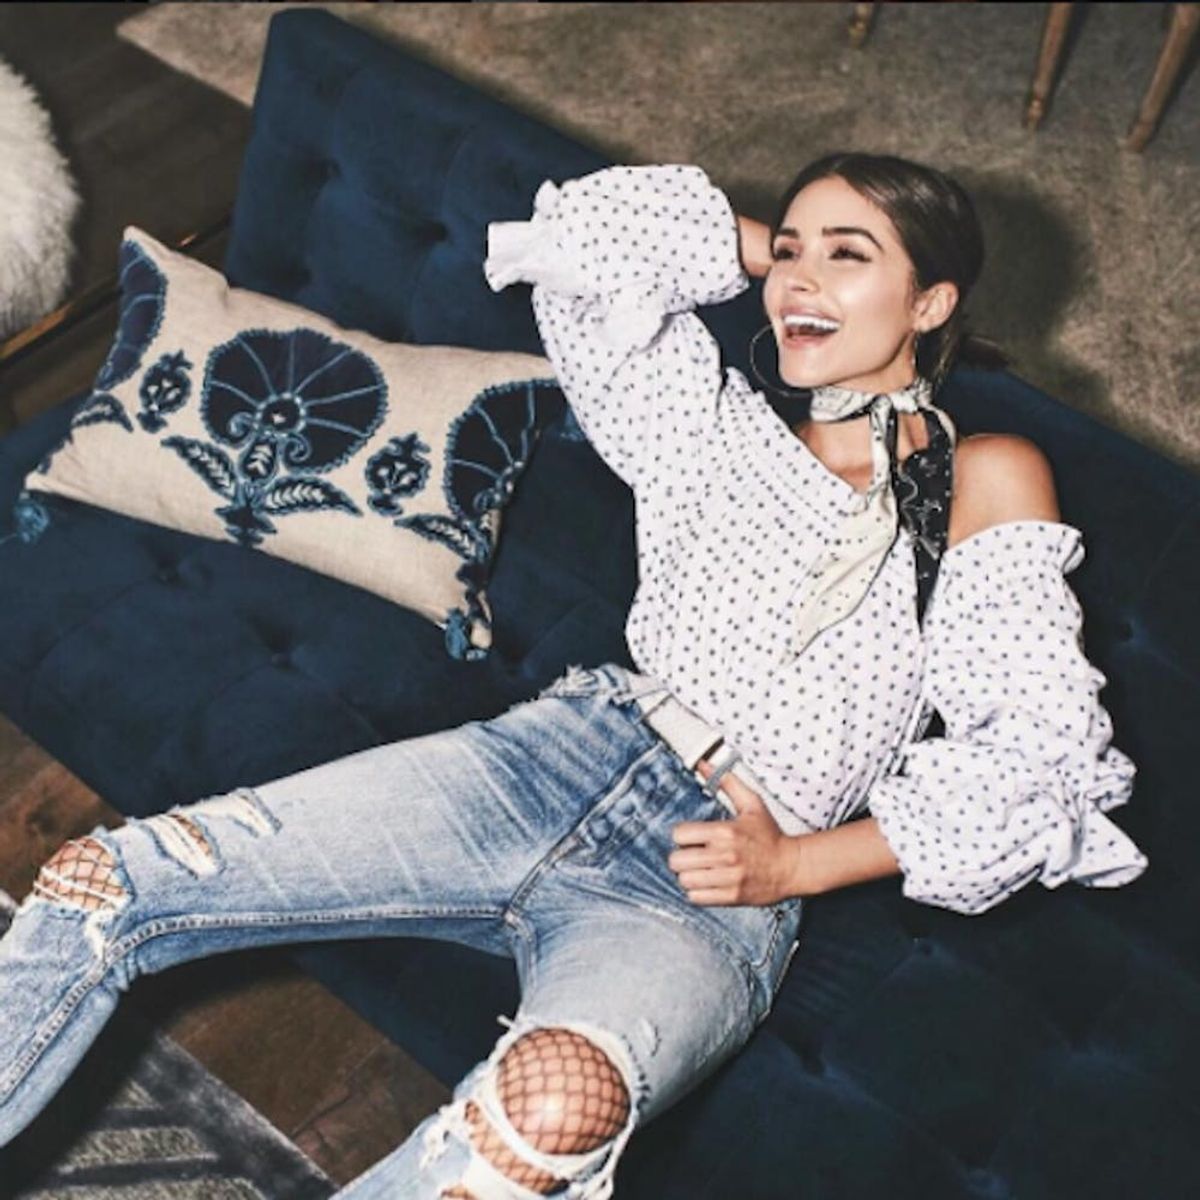 Olivia Culpo’s Best Tricks for Nailing That #OOTD